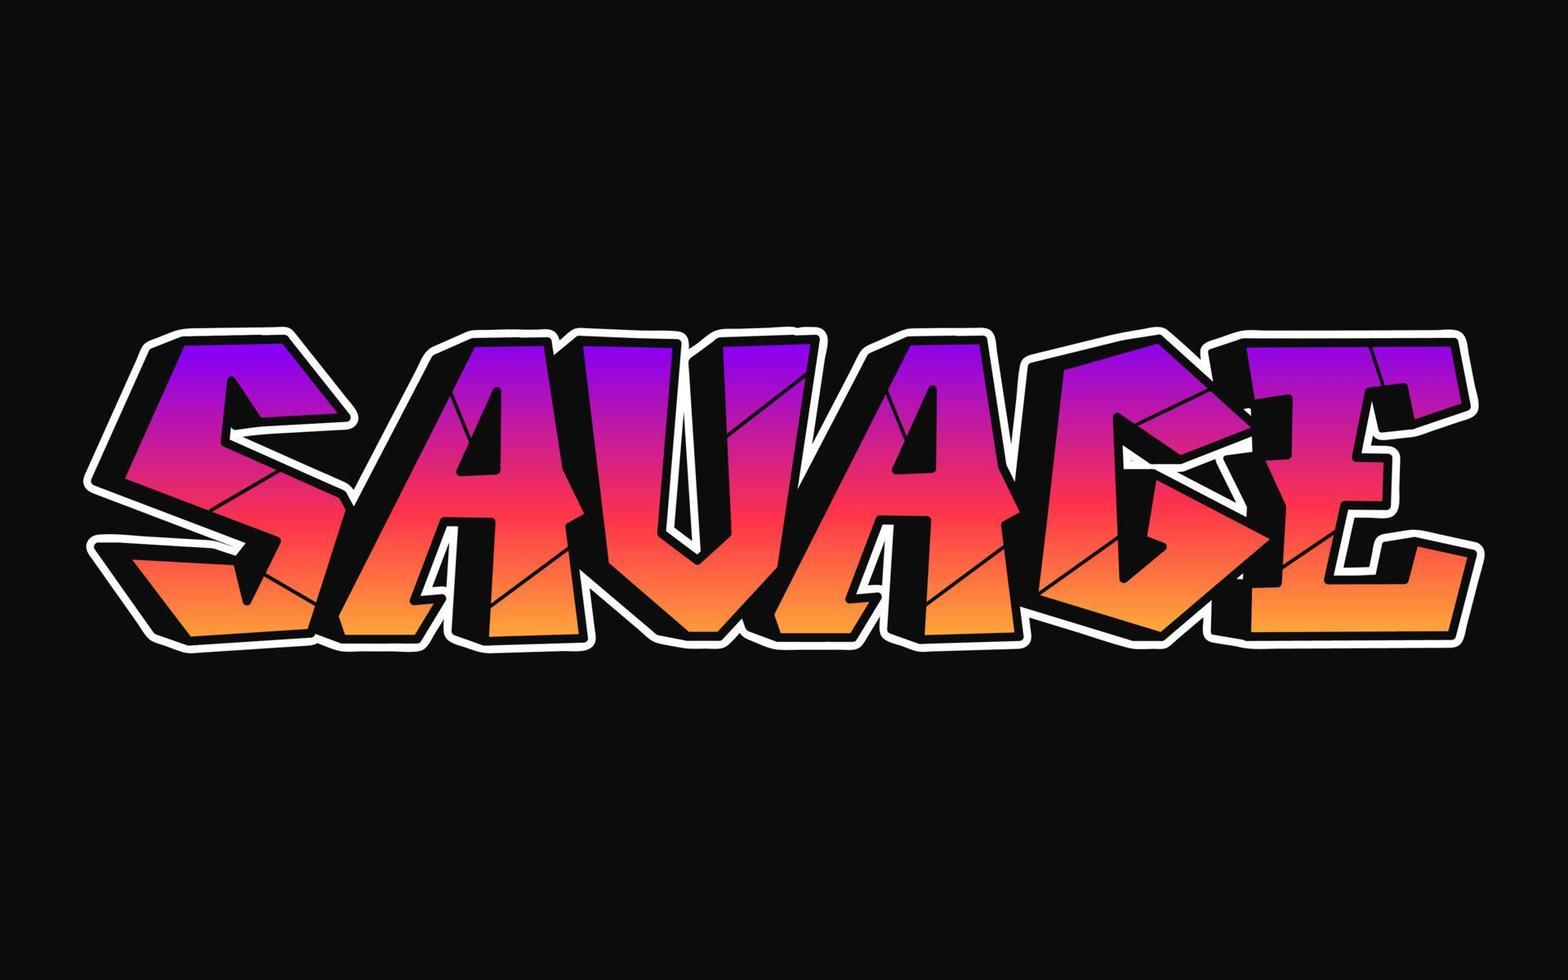 Savage word graffiti style letters. Vector hand drawn doodle cartoon logo savage illustration. Print for poster,t-shirt,tee,logo,sticker concept